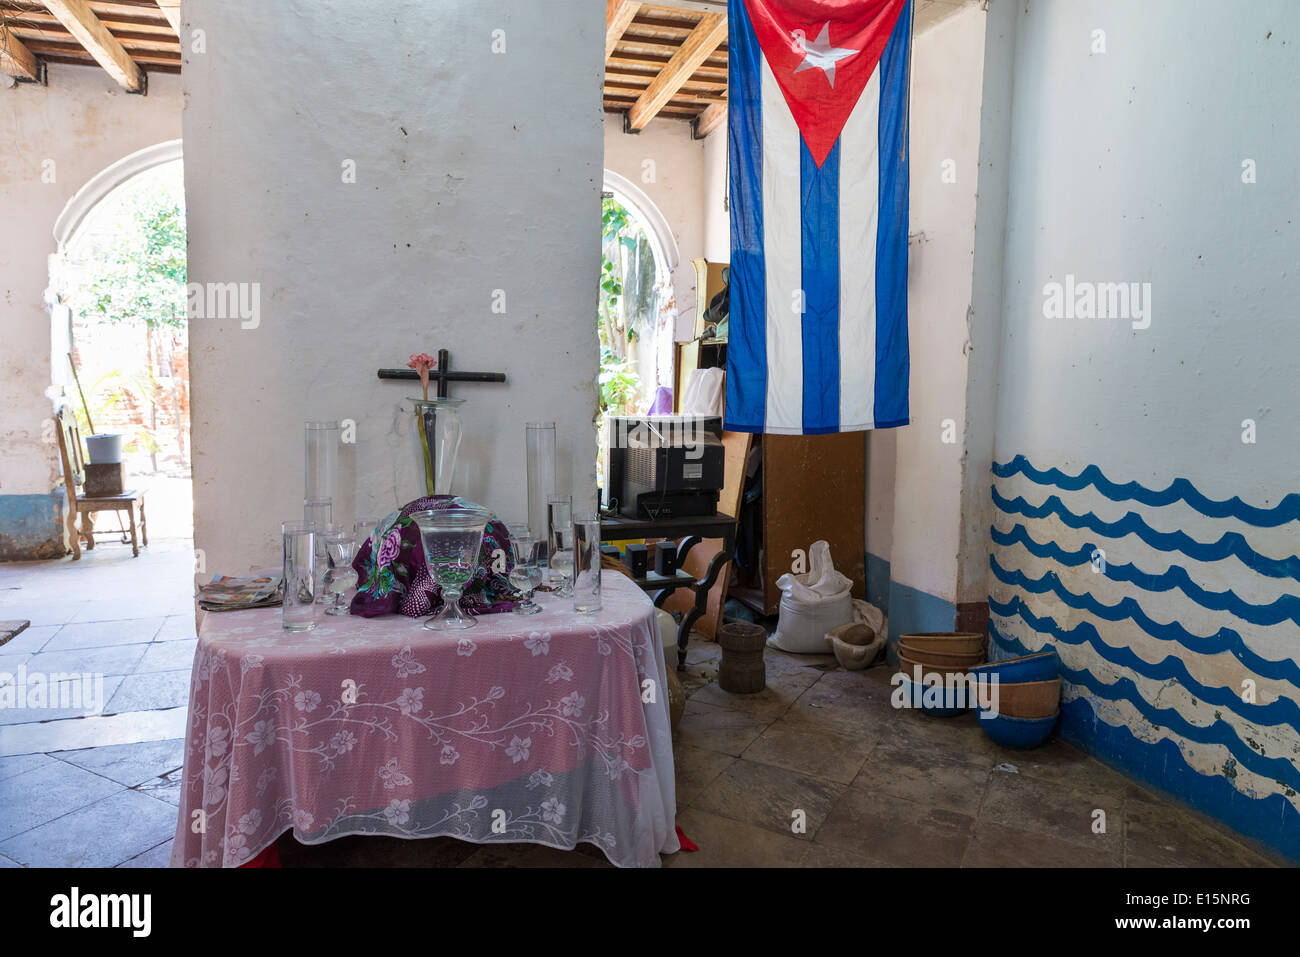 Santeria, syncretic religion of West Africa and Caribbean origin influenced by and syncretized Roman Catholicism, Trinidad, Cuba Stock Photo